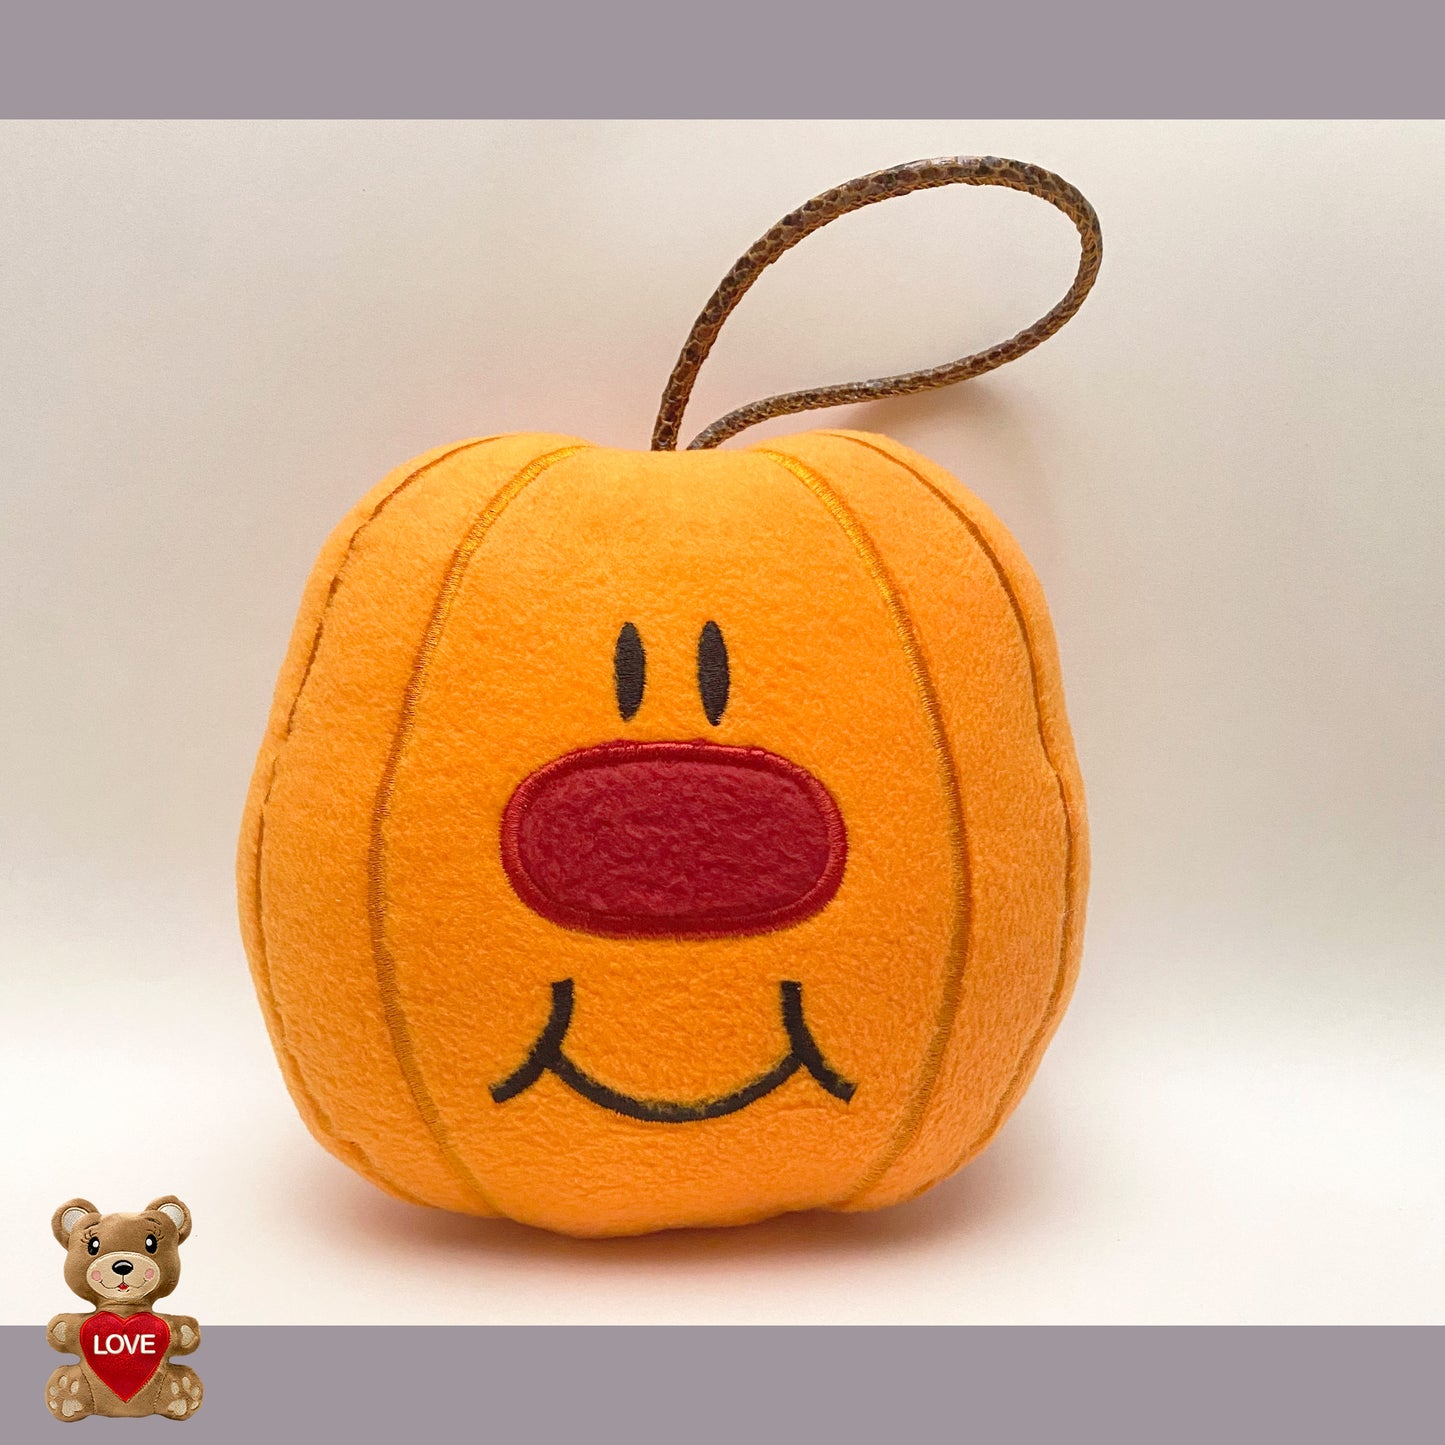 Personalised Plush Soft Toy Haloween Pumpkin with face ,Super cute personalised soft plush toy, Personalised Gift, Unique Personalized Birthday Gifts , Custom Gifts For Children